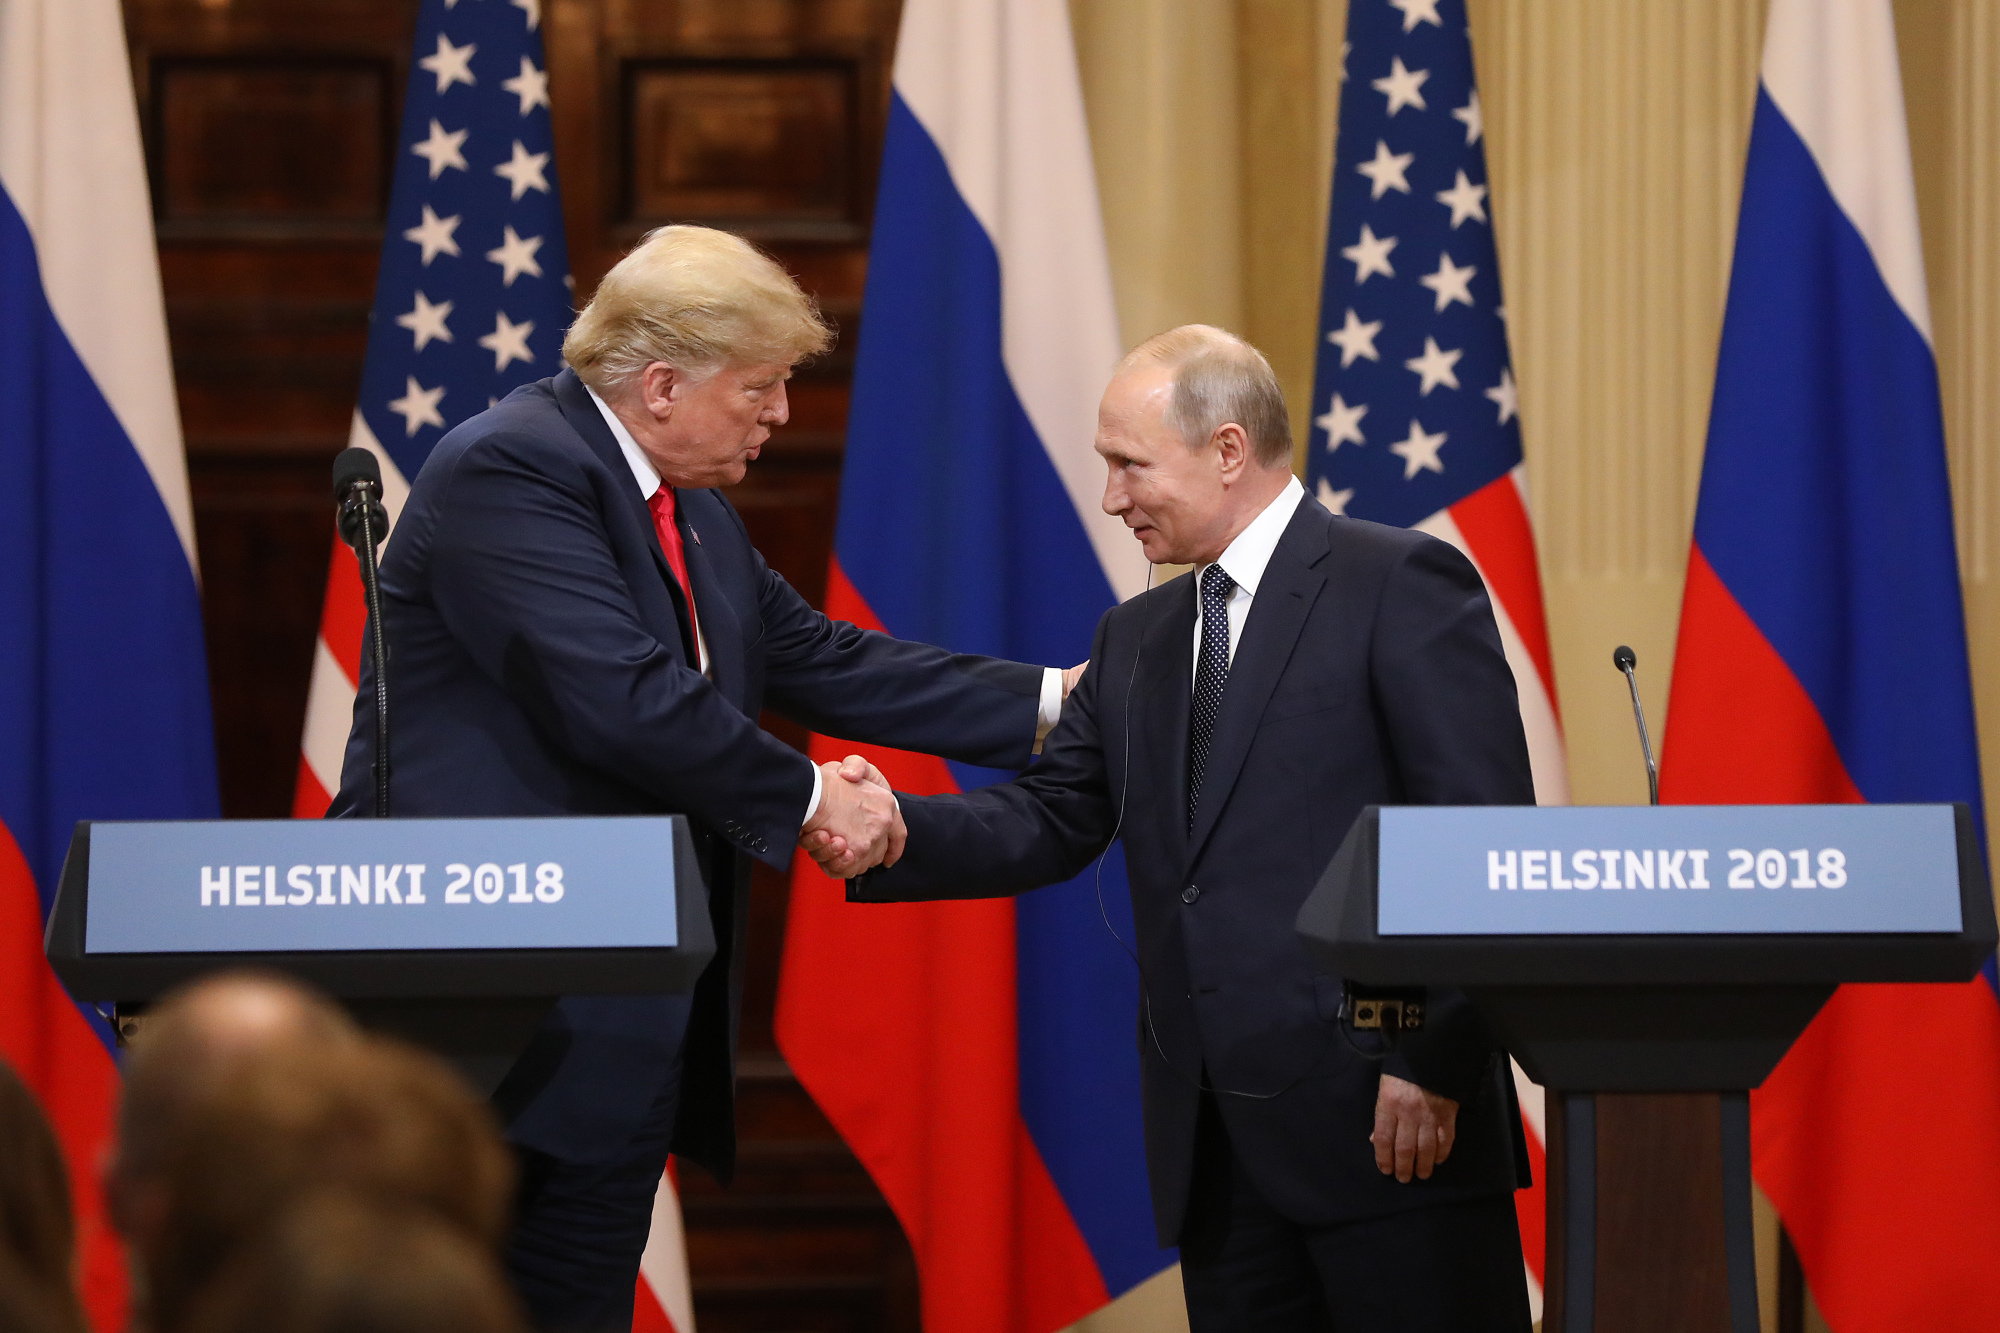 Trump and Putin during a news conference in Helsinki in 2018.&nbsp;